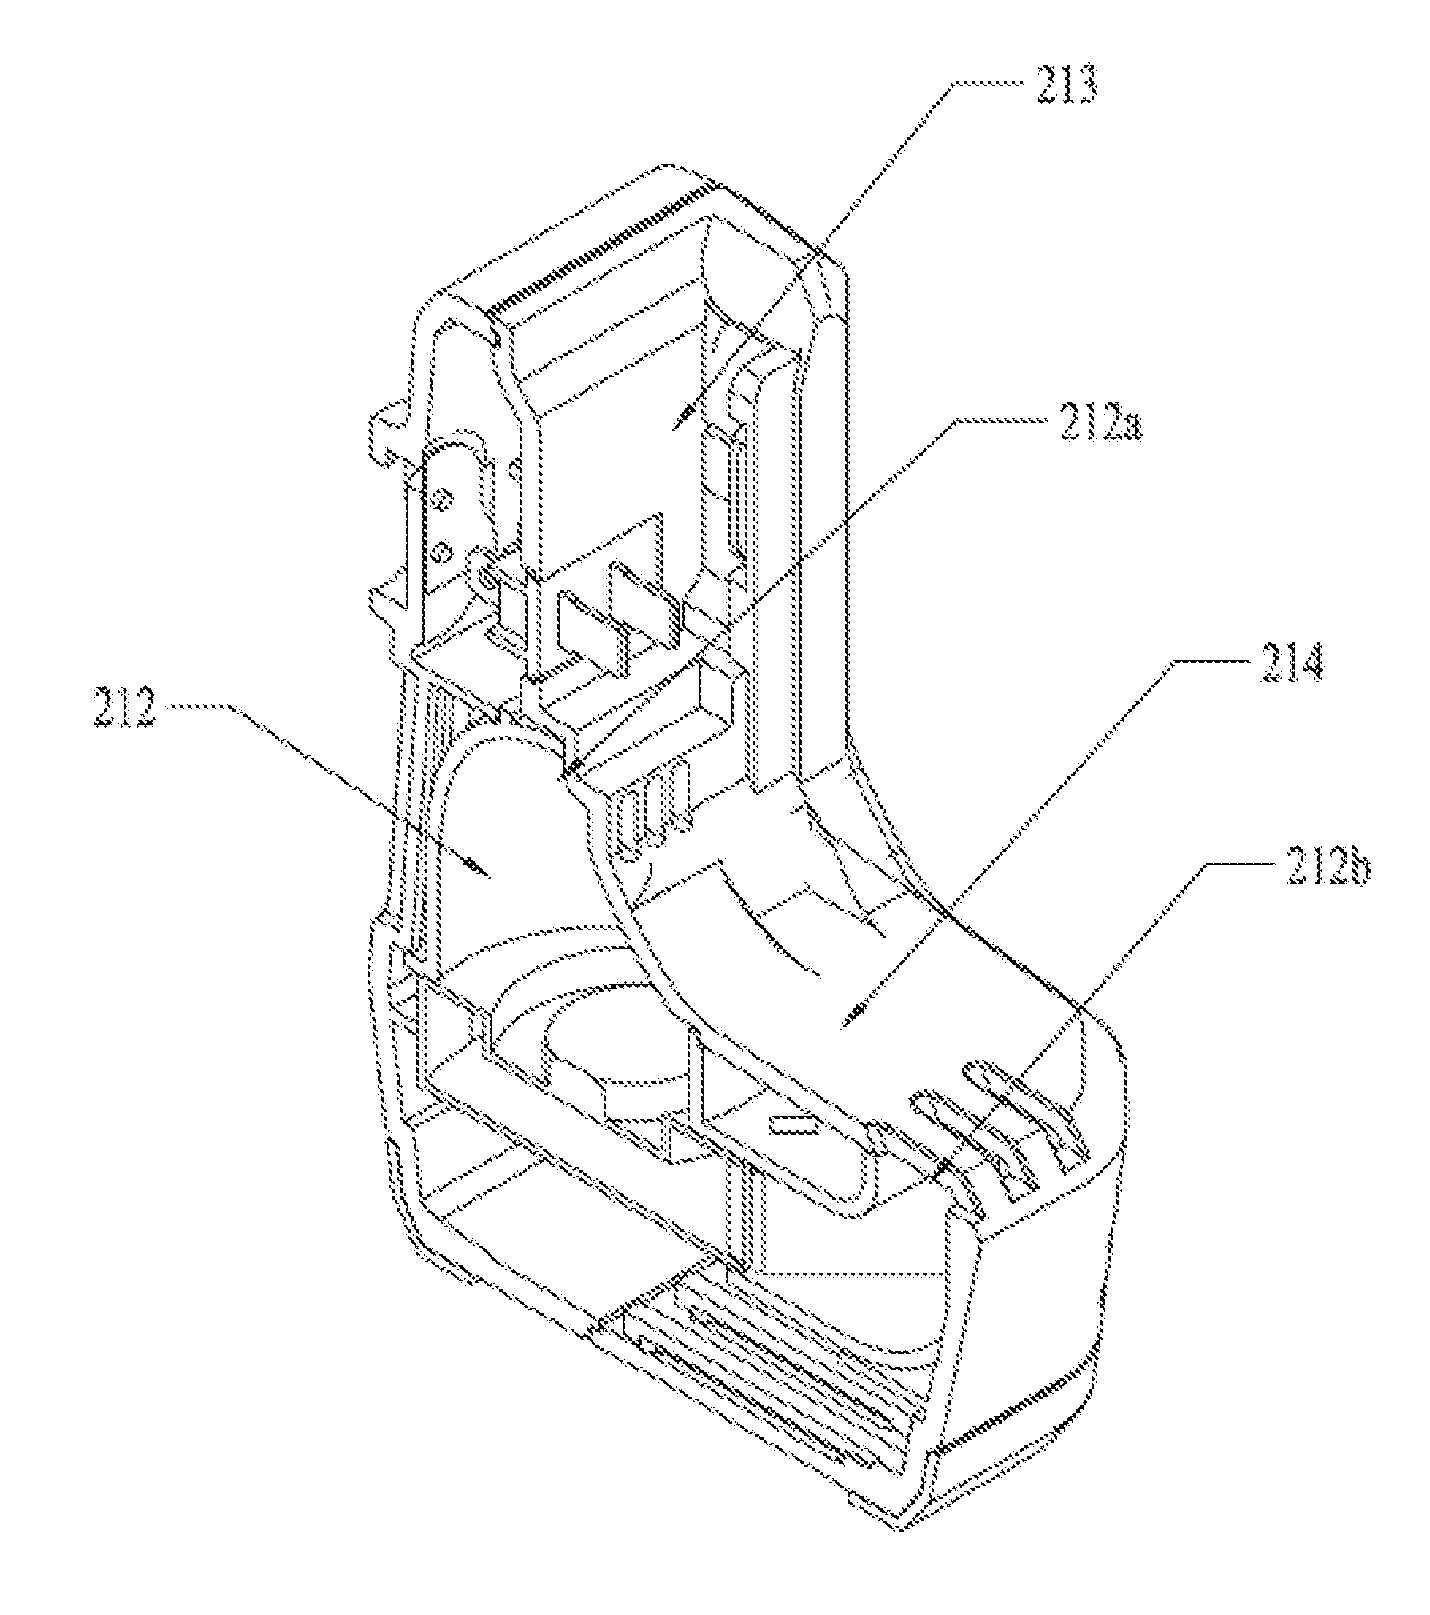 Charger, charging system and power tool with battery pack